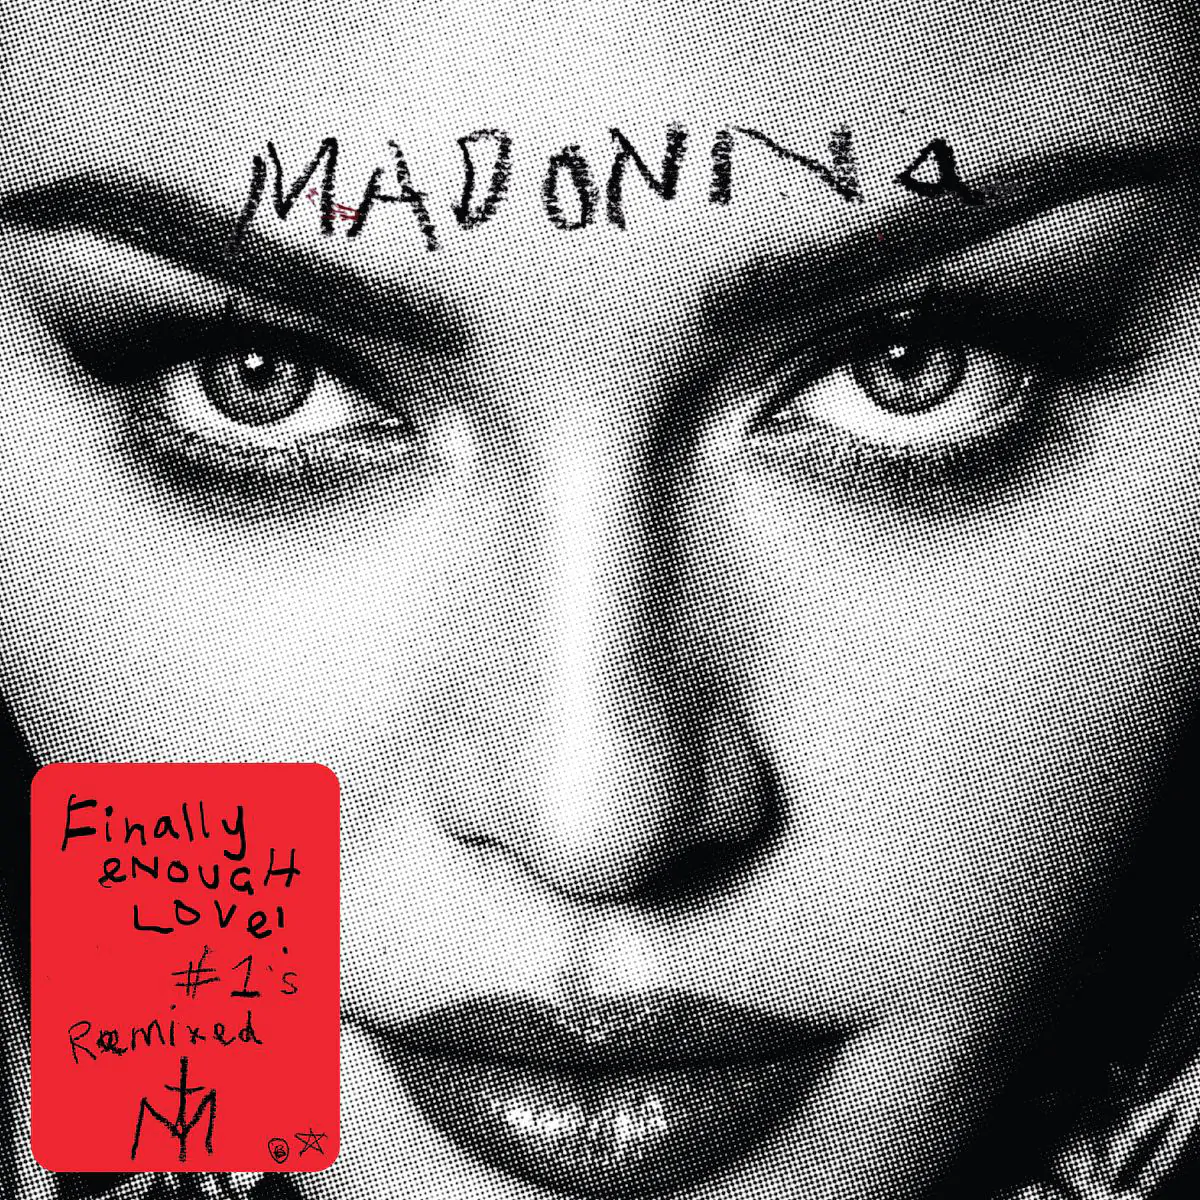 MADONNA to release new career-spanning compilations celebrating the icon’s record 50 #1 club hits across four decades